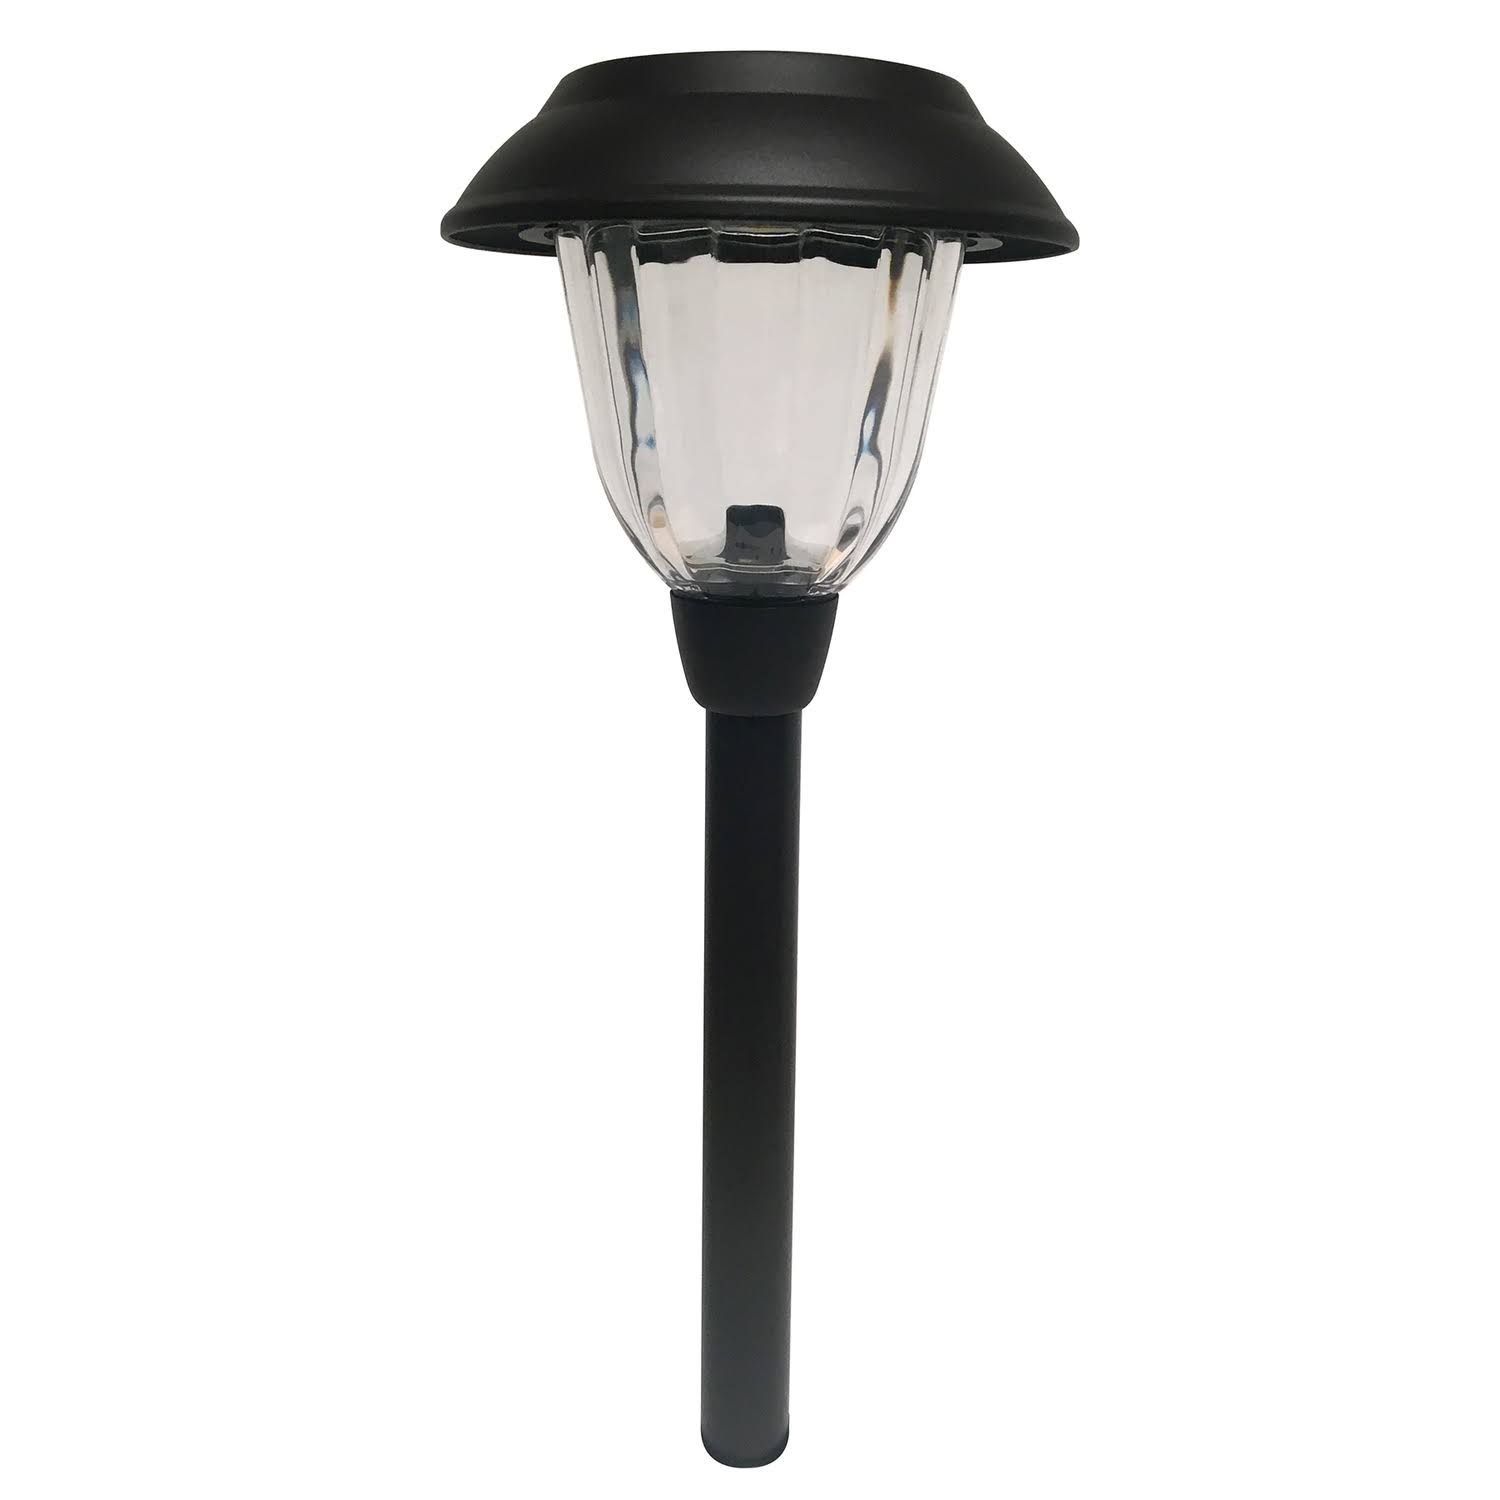 Living Accents 3908522 Bronze Solar Powered LED Pathway Light, Pack of 6